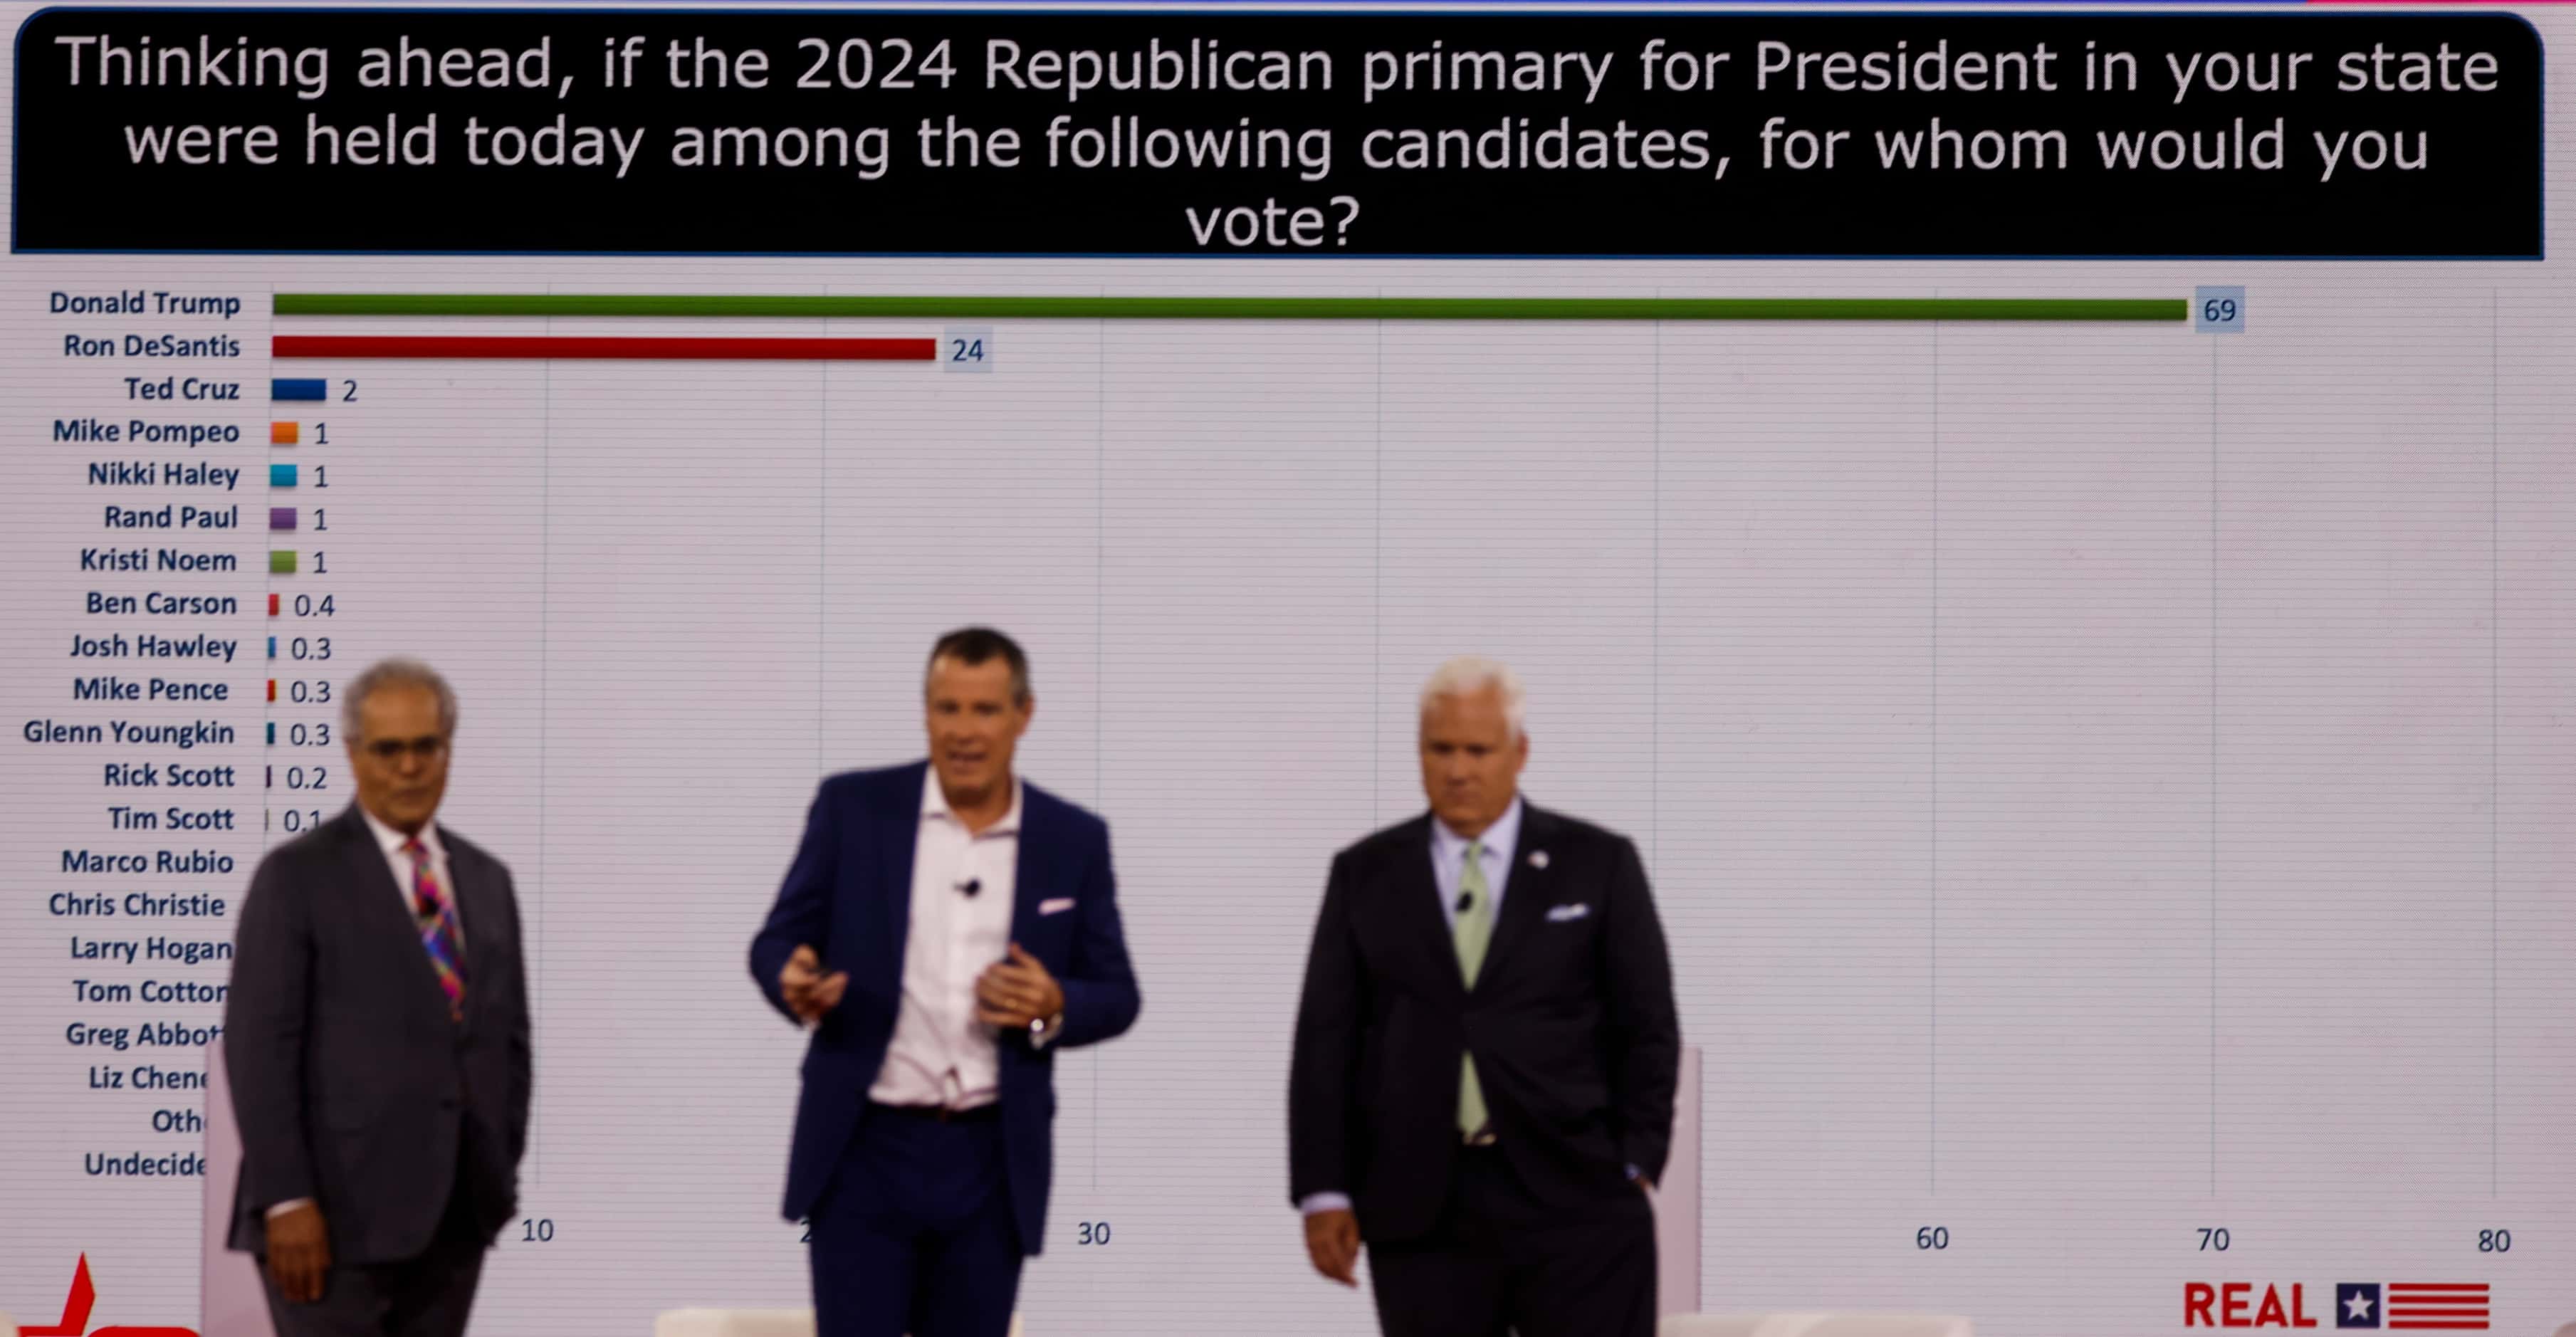 A CPAC Dallas straw poll showing Republicans wanting Donald Trump for president in 2024...